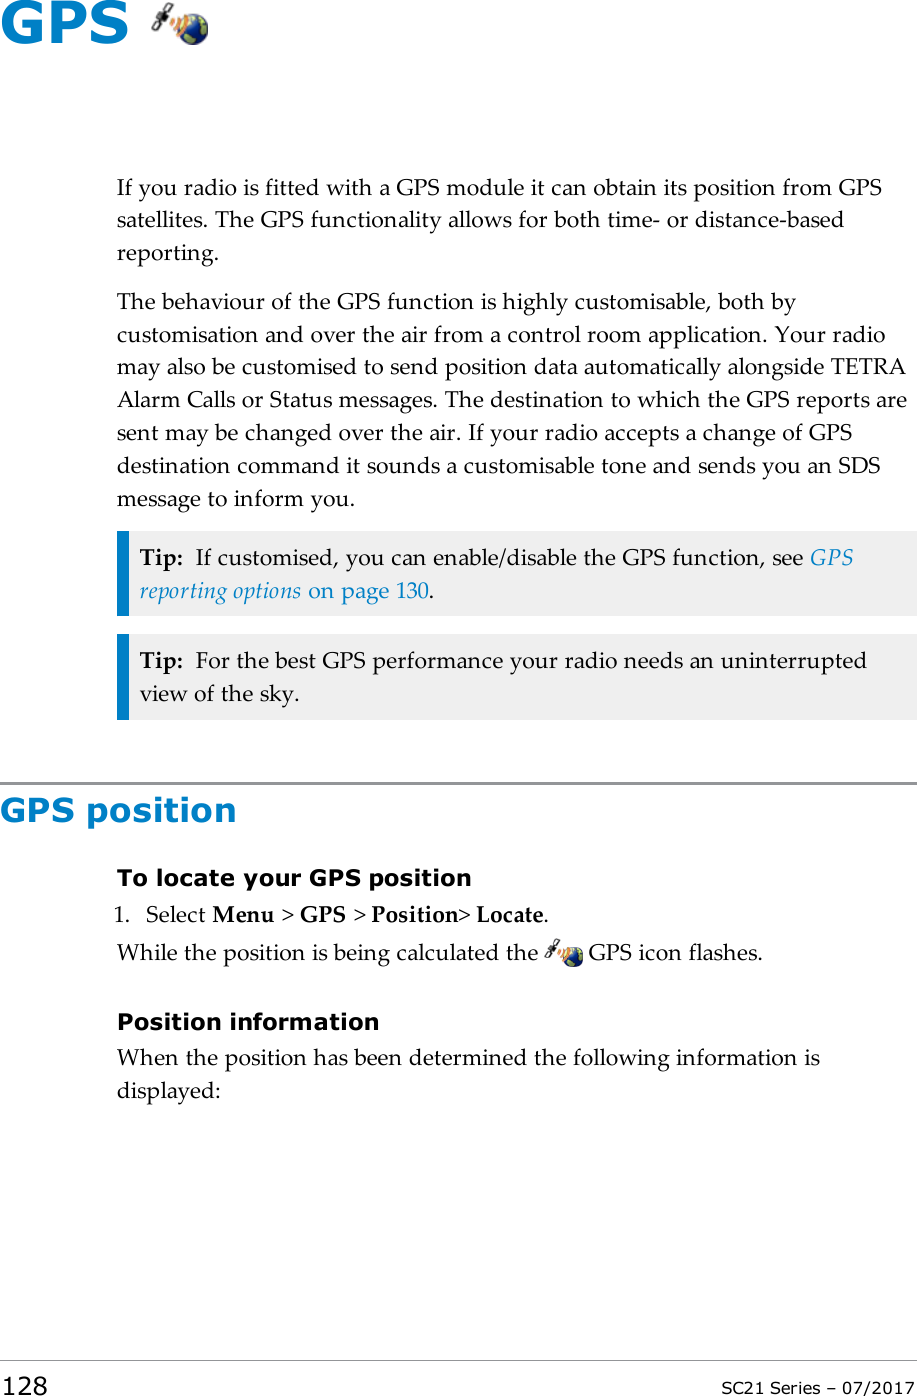 GPSIf you radio is fitted with a GPS module it can obtain its position from GPSsatellites. The GPS functionality allows for both time- or distance-basedreporting.The behaviour of the GPS function is highly customisable, both bycustomisation and over the air from a control room application. Your radiomay also be customised to send position data automatically alongside TETRAAlarm Calls or Status messages. The destination to which the GPS reports aresent may be changed over the air. If your radio accepts a change of GPSdestination command it sounds a customisable tone and sends you an SDSmessage to inform you.Tip: If customised, you can enable/disable the GPS function, see GPSreporting options on page130.Tip: For the best GPS performance your radio needs an uninterruptedview of the sky.GPS positionTo locate your GPS position1. Select Menu &gt;GPS &gt;Position&gt;Locate.While the position is being calculated the GPS icon flashes.Position informationWhen the position has been determined the following information isdisplayed:128 SC21 Series – 07/2017